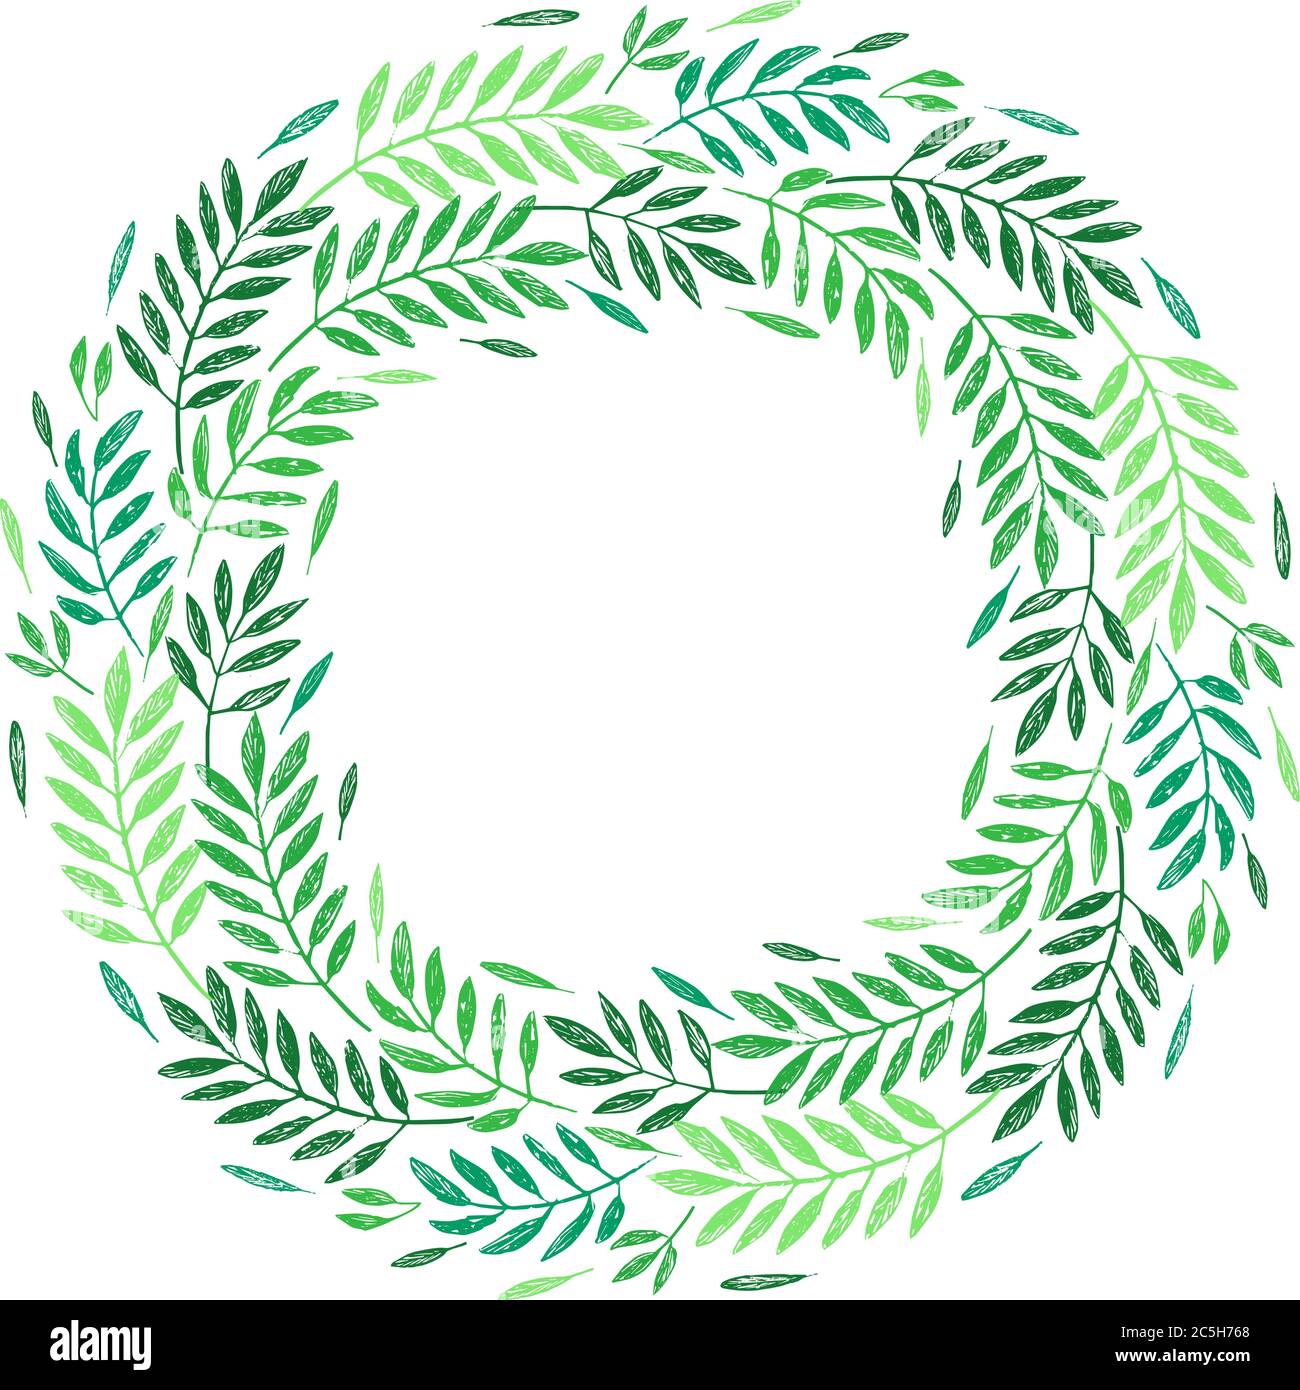 Tropical palm leaves, foliage wreath, round frame. Vector illustration. Tropical jungle palm tree background. Invitation template, greeting card templ Stock Vector